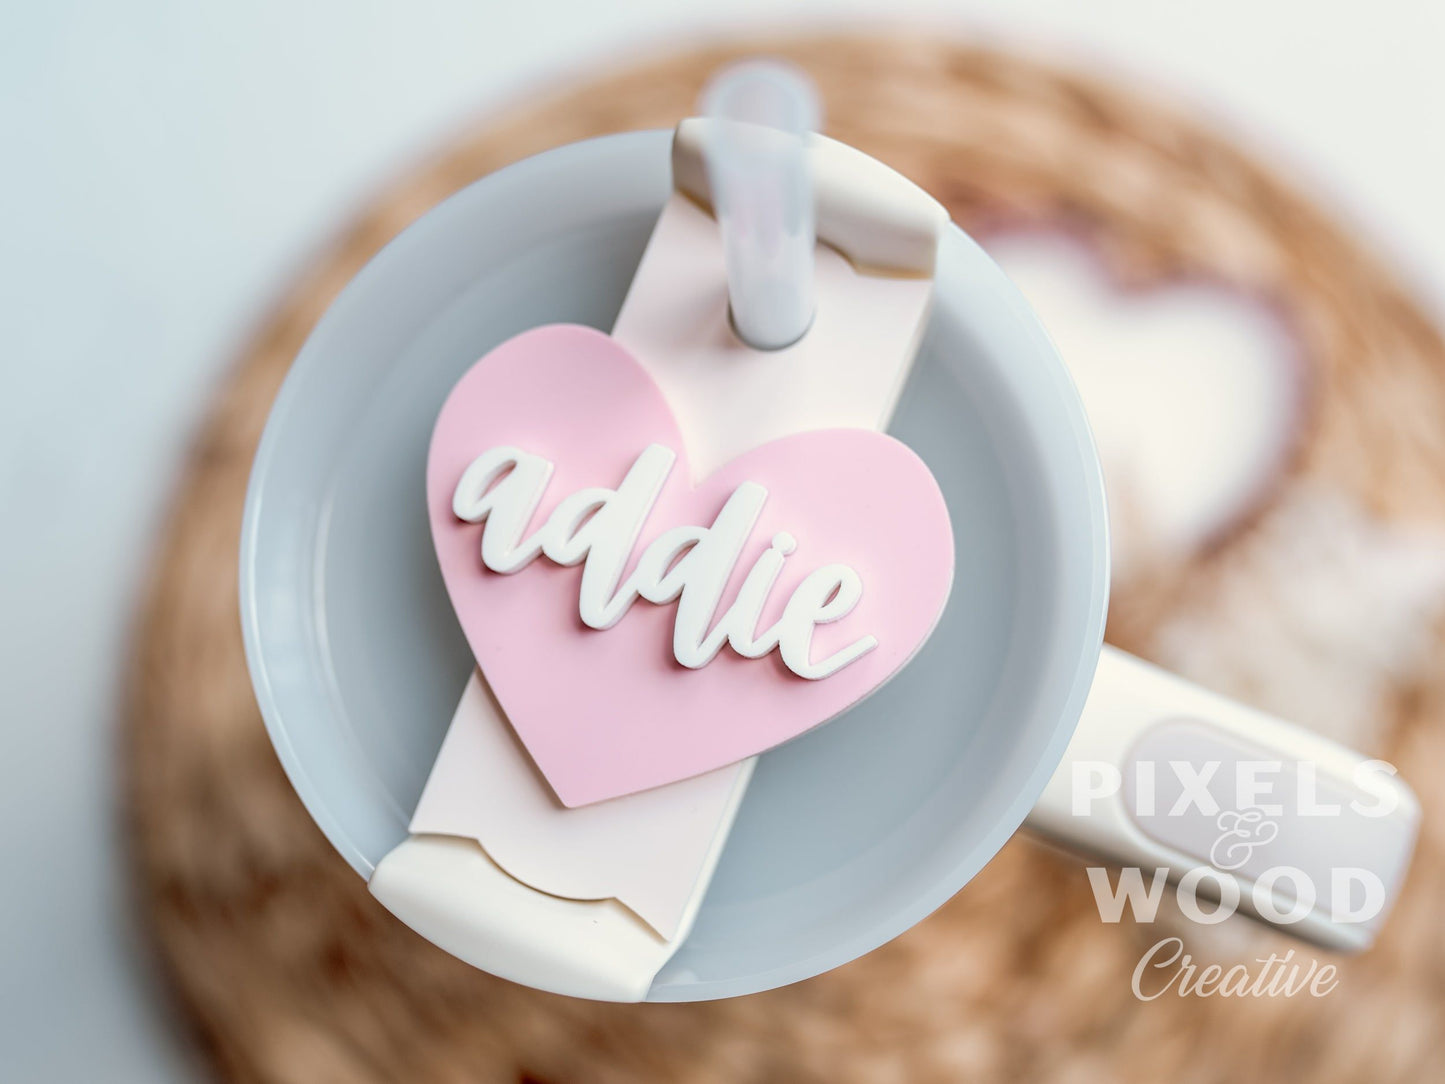 Valentine Heart Stanley Quencher Acrylic Name Tag- Vertical